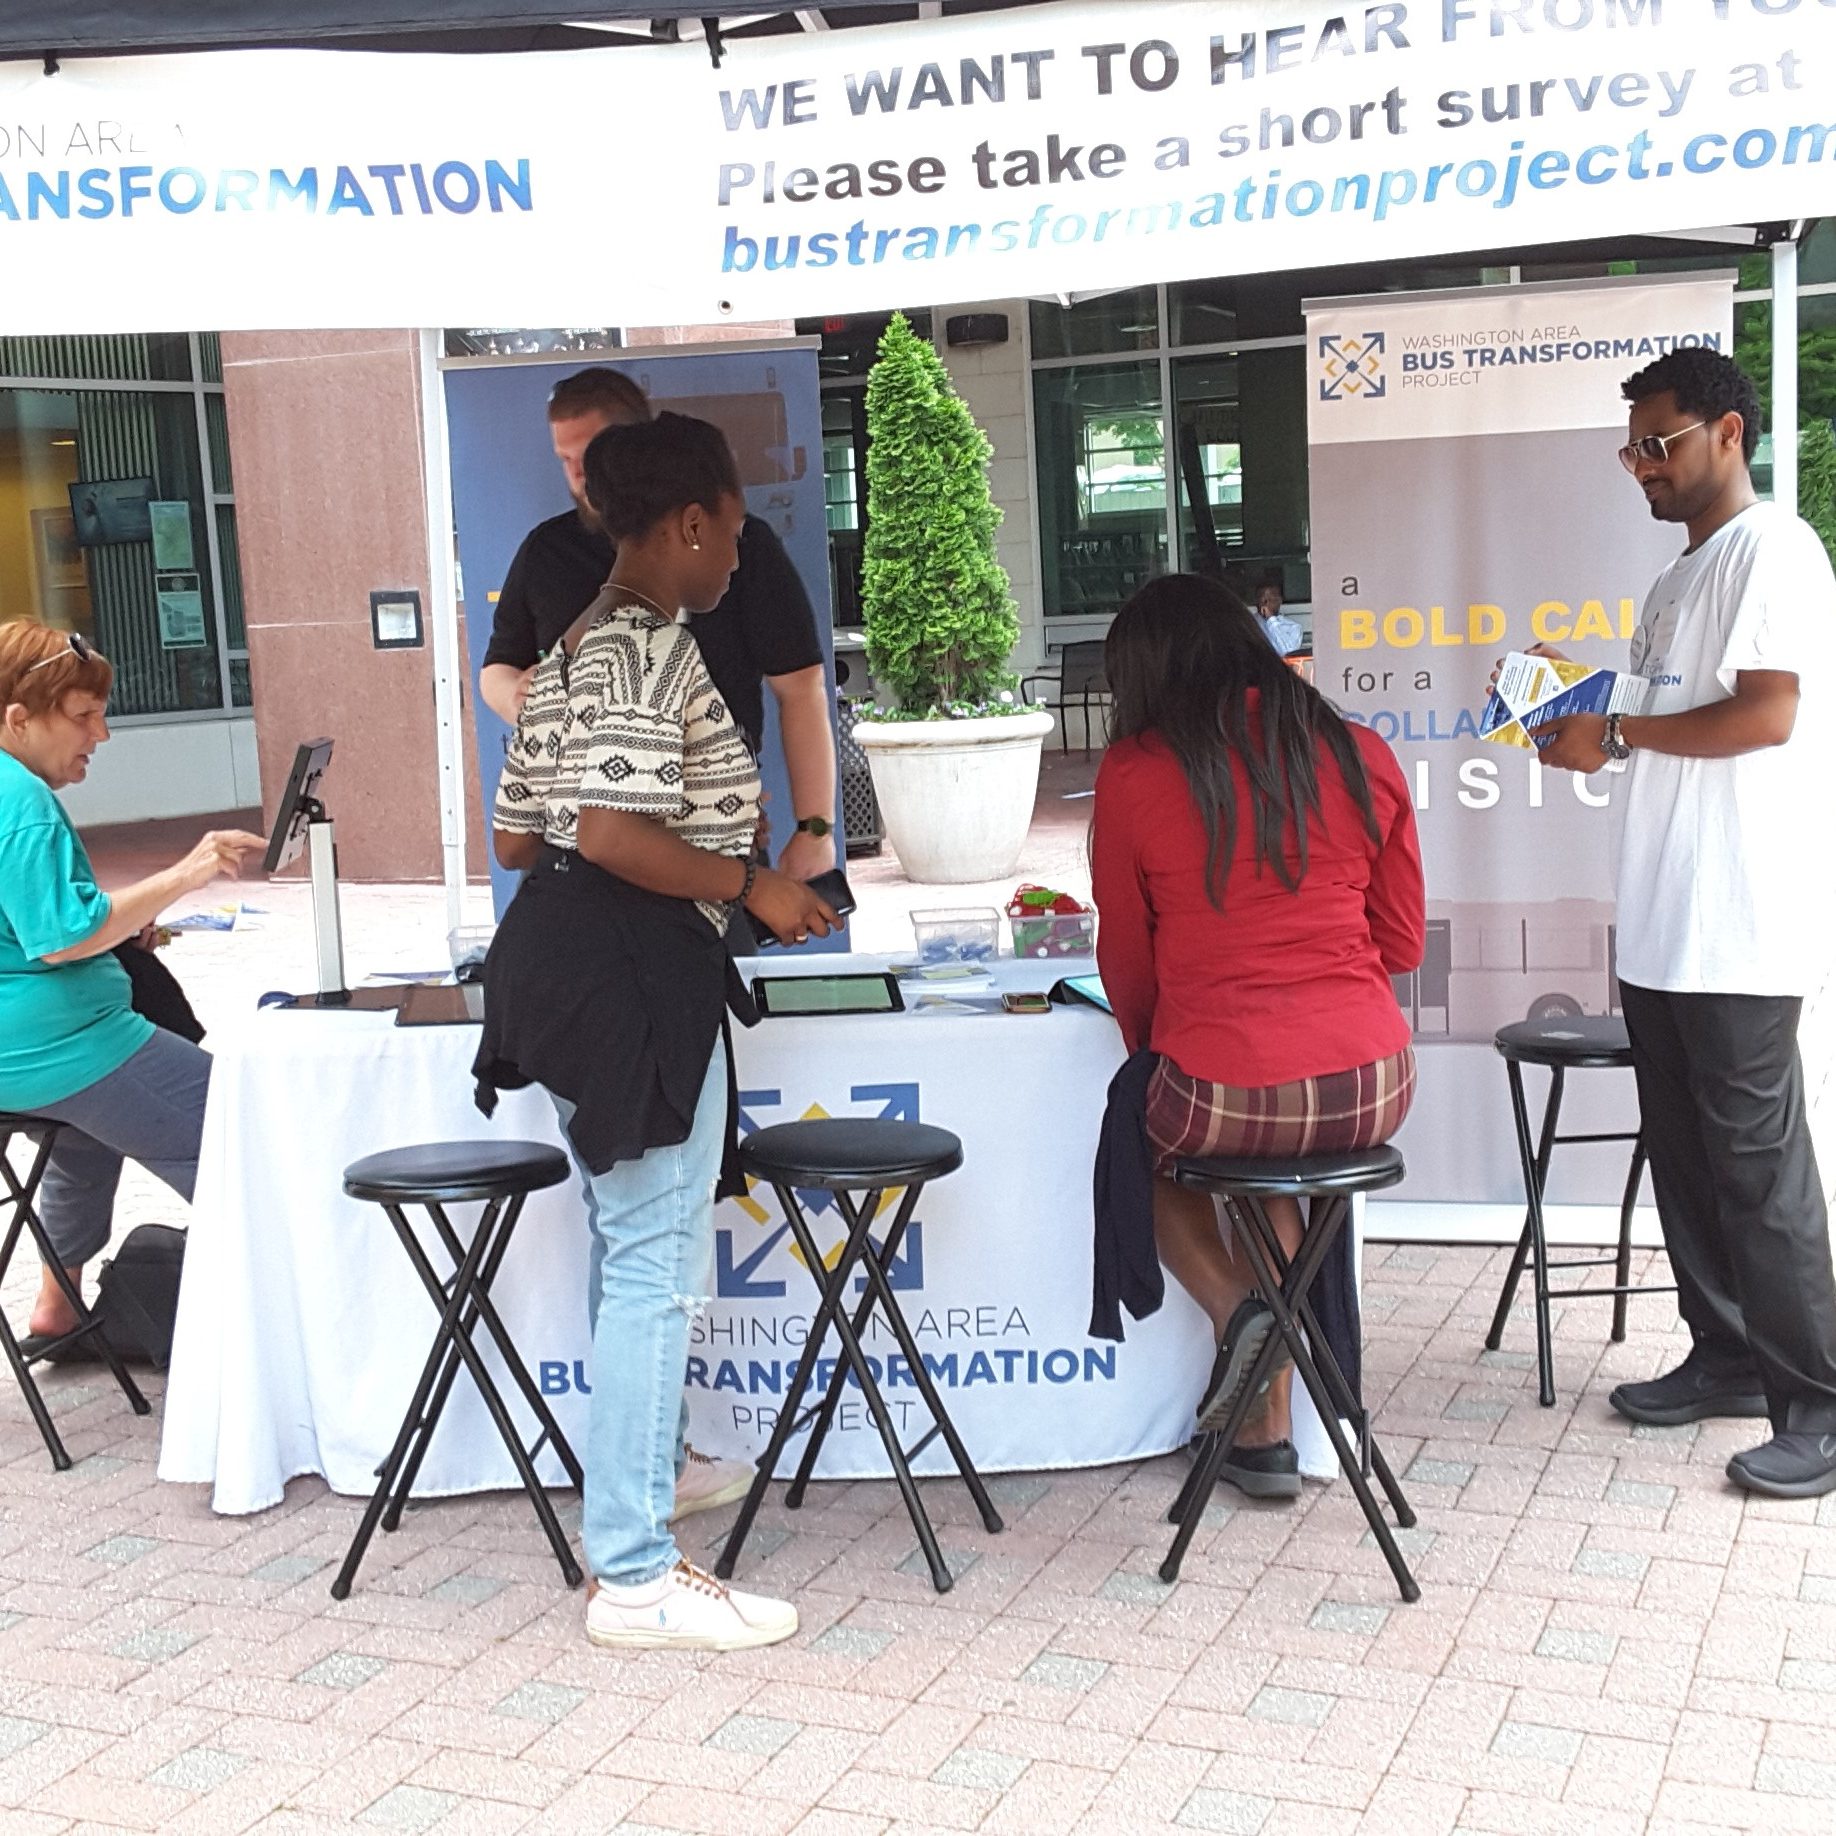 Event booth with people at the Village at Shirlington